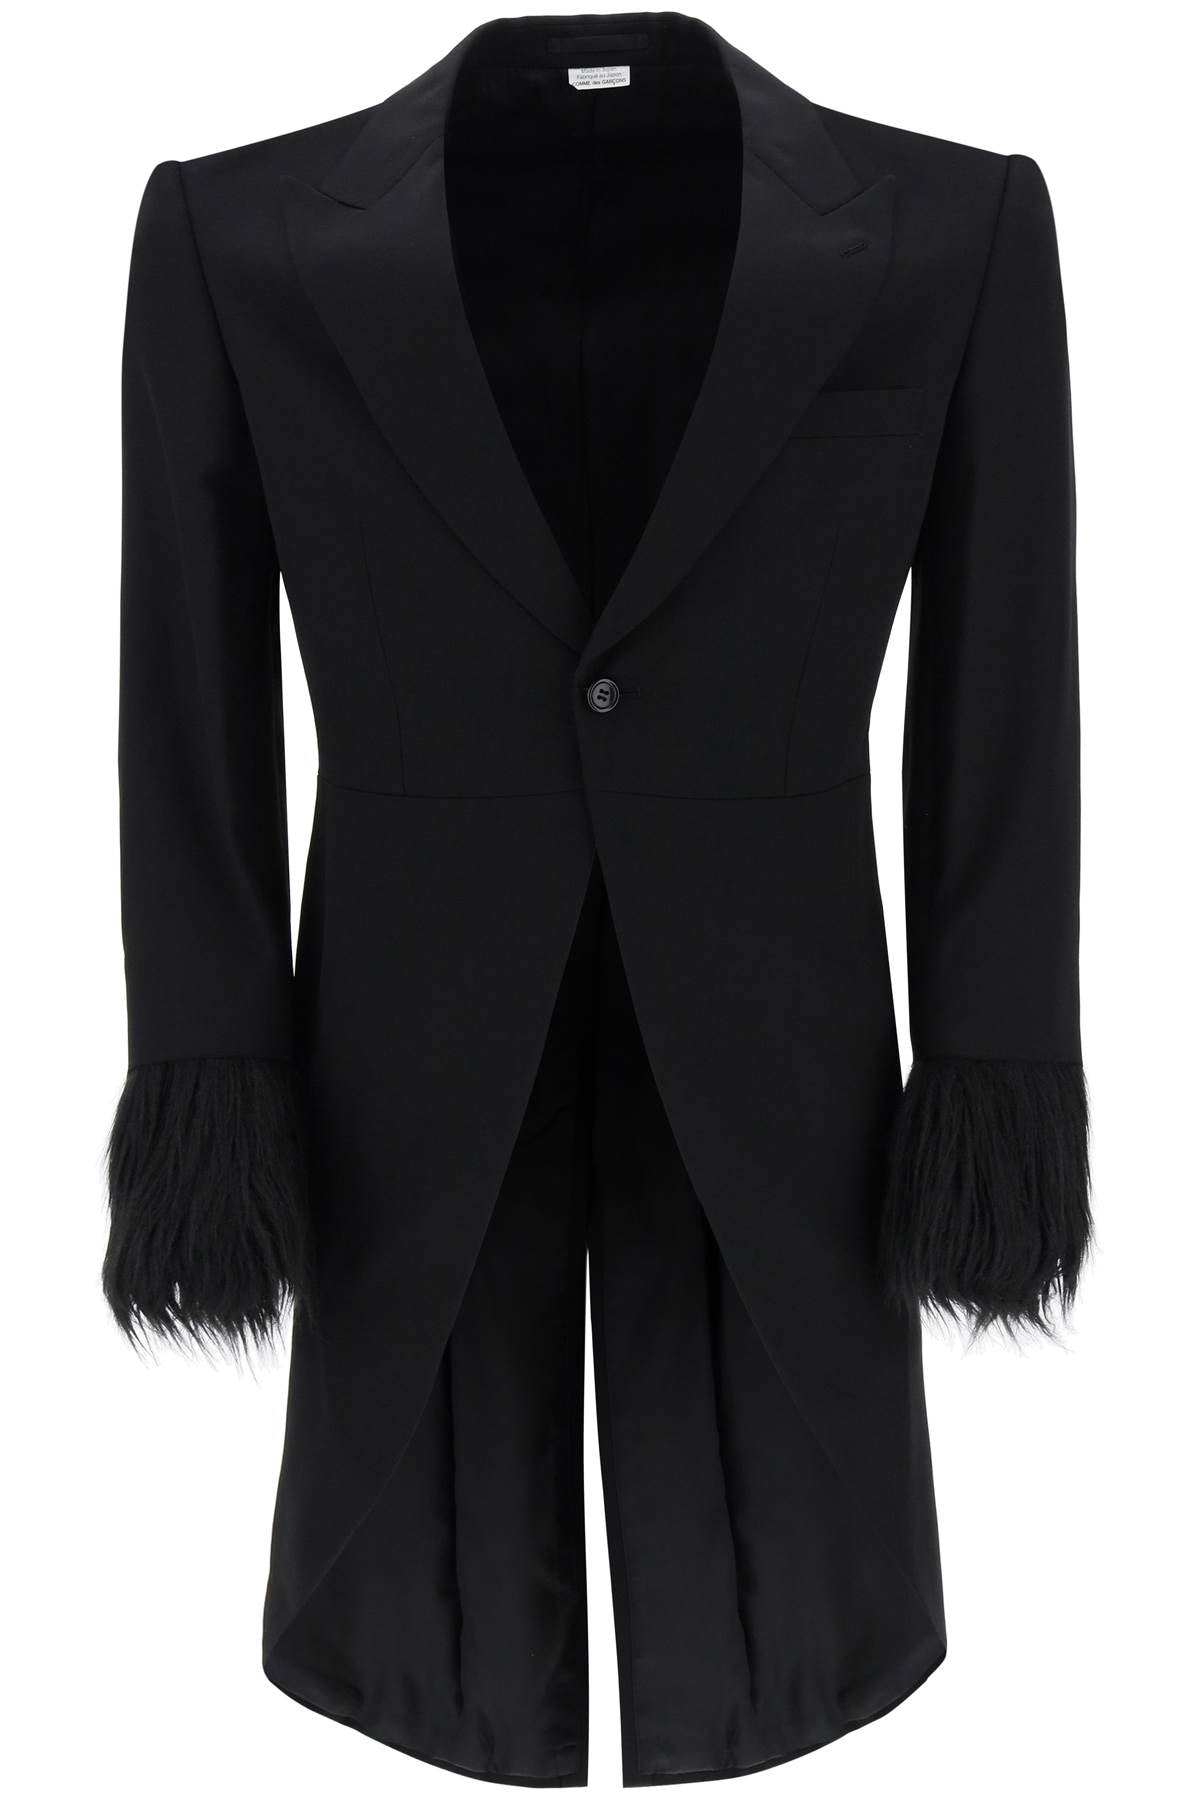 COMME DES GARÇONS HOMME PLUS Men's Tailcoat with Eco-Fur Inserts - Fall/Winter 2024 Collection